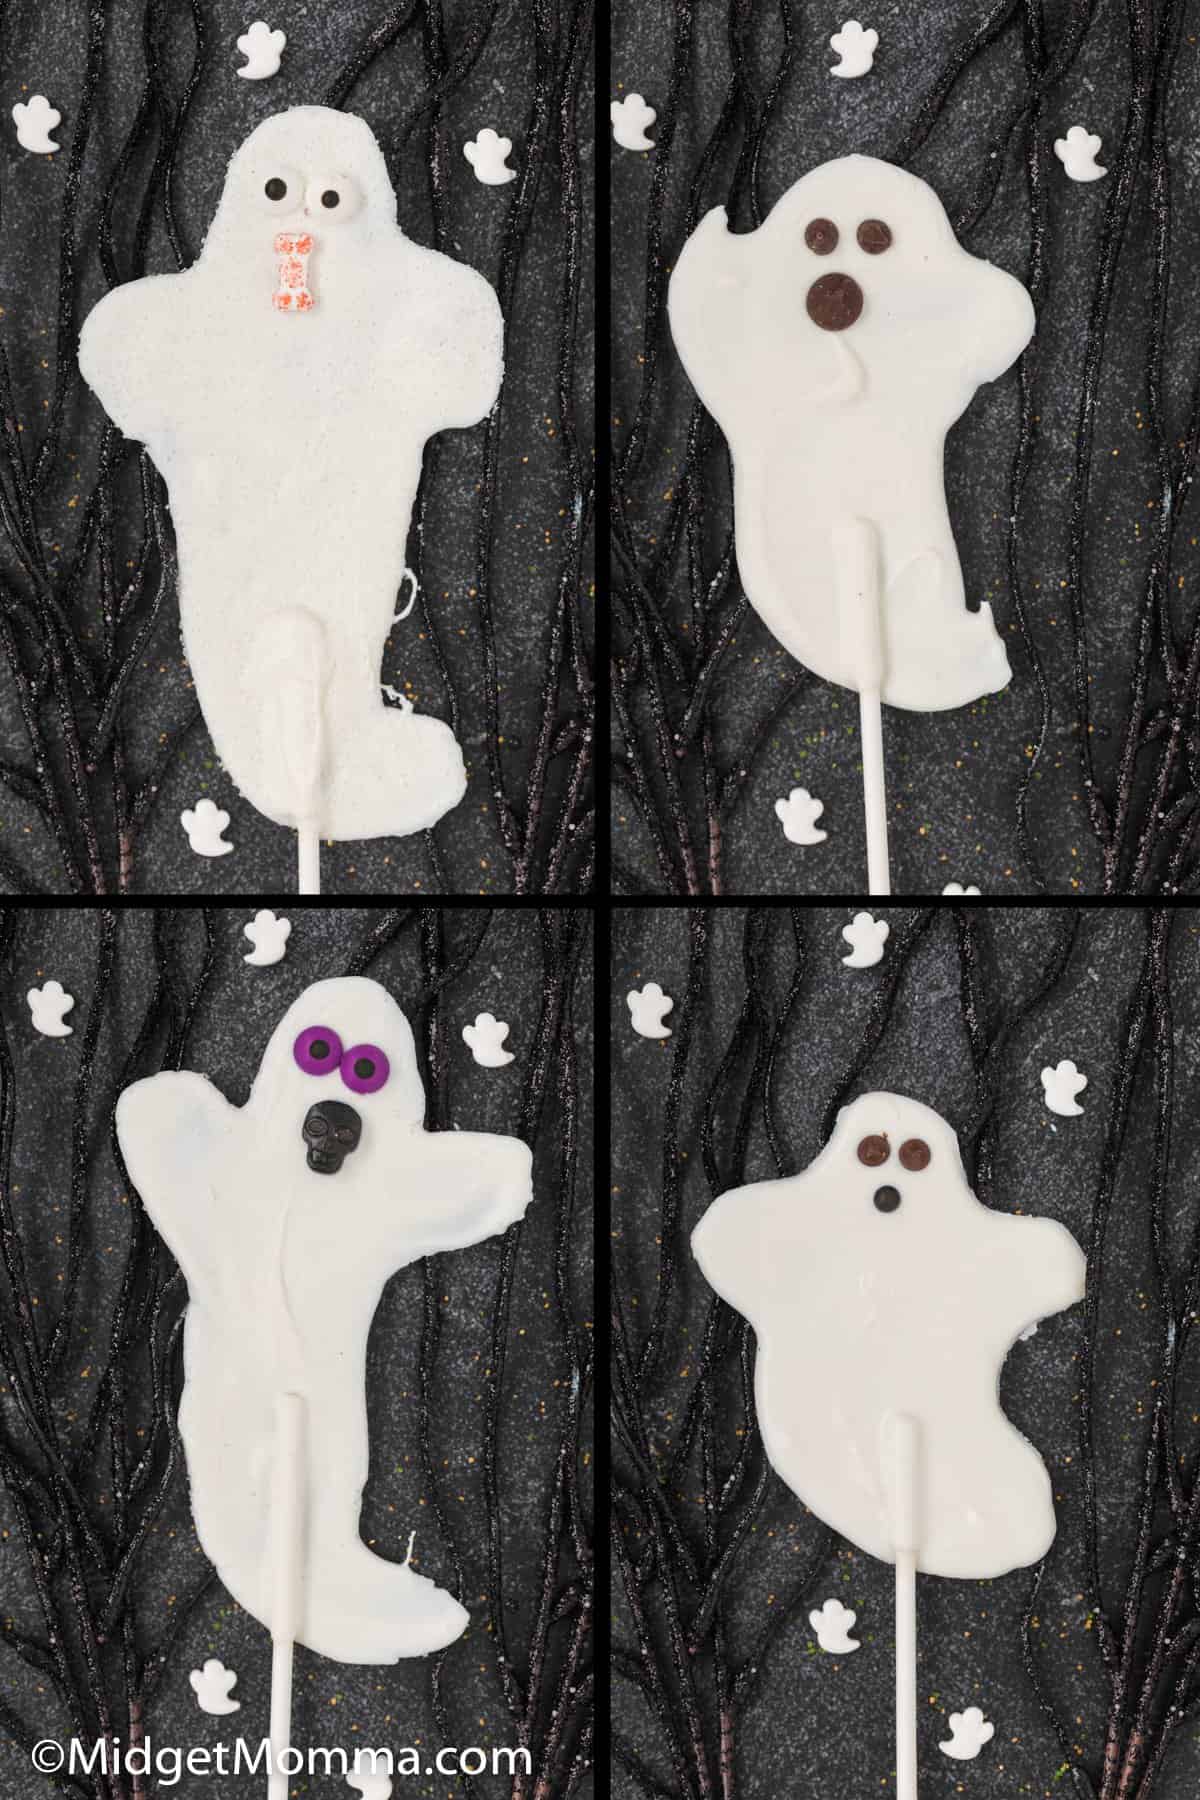 White Chocolate Ghost Pops